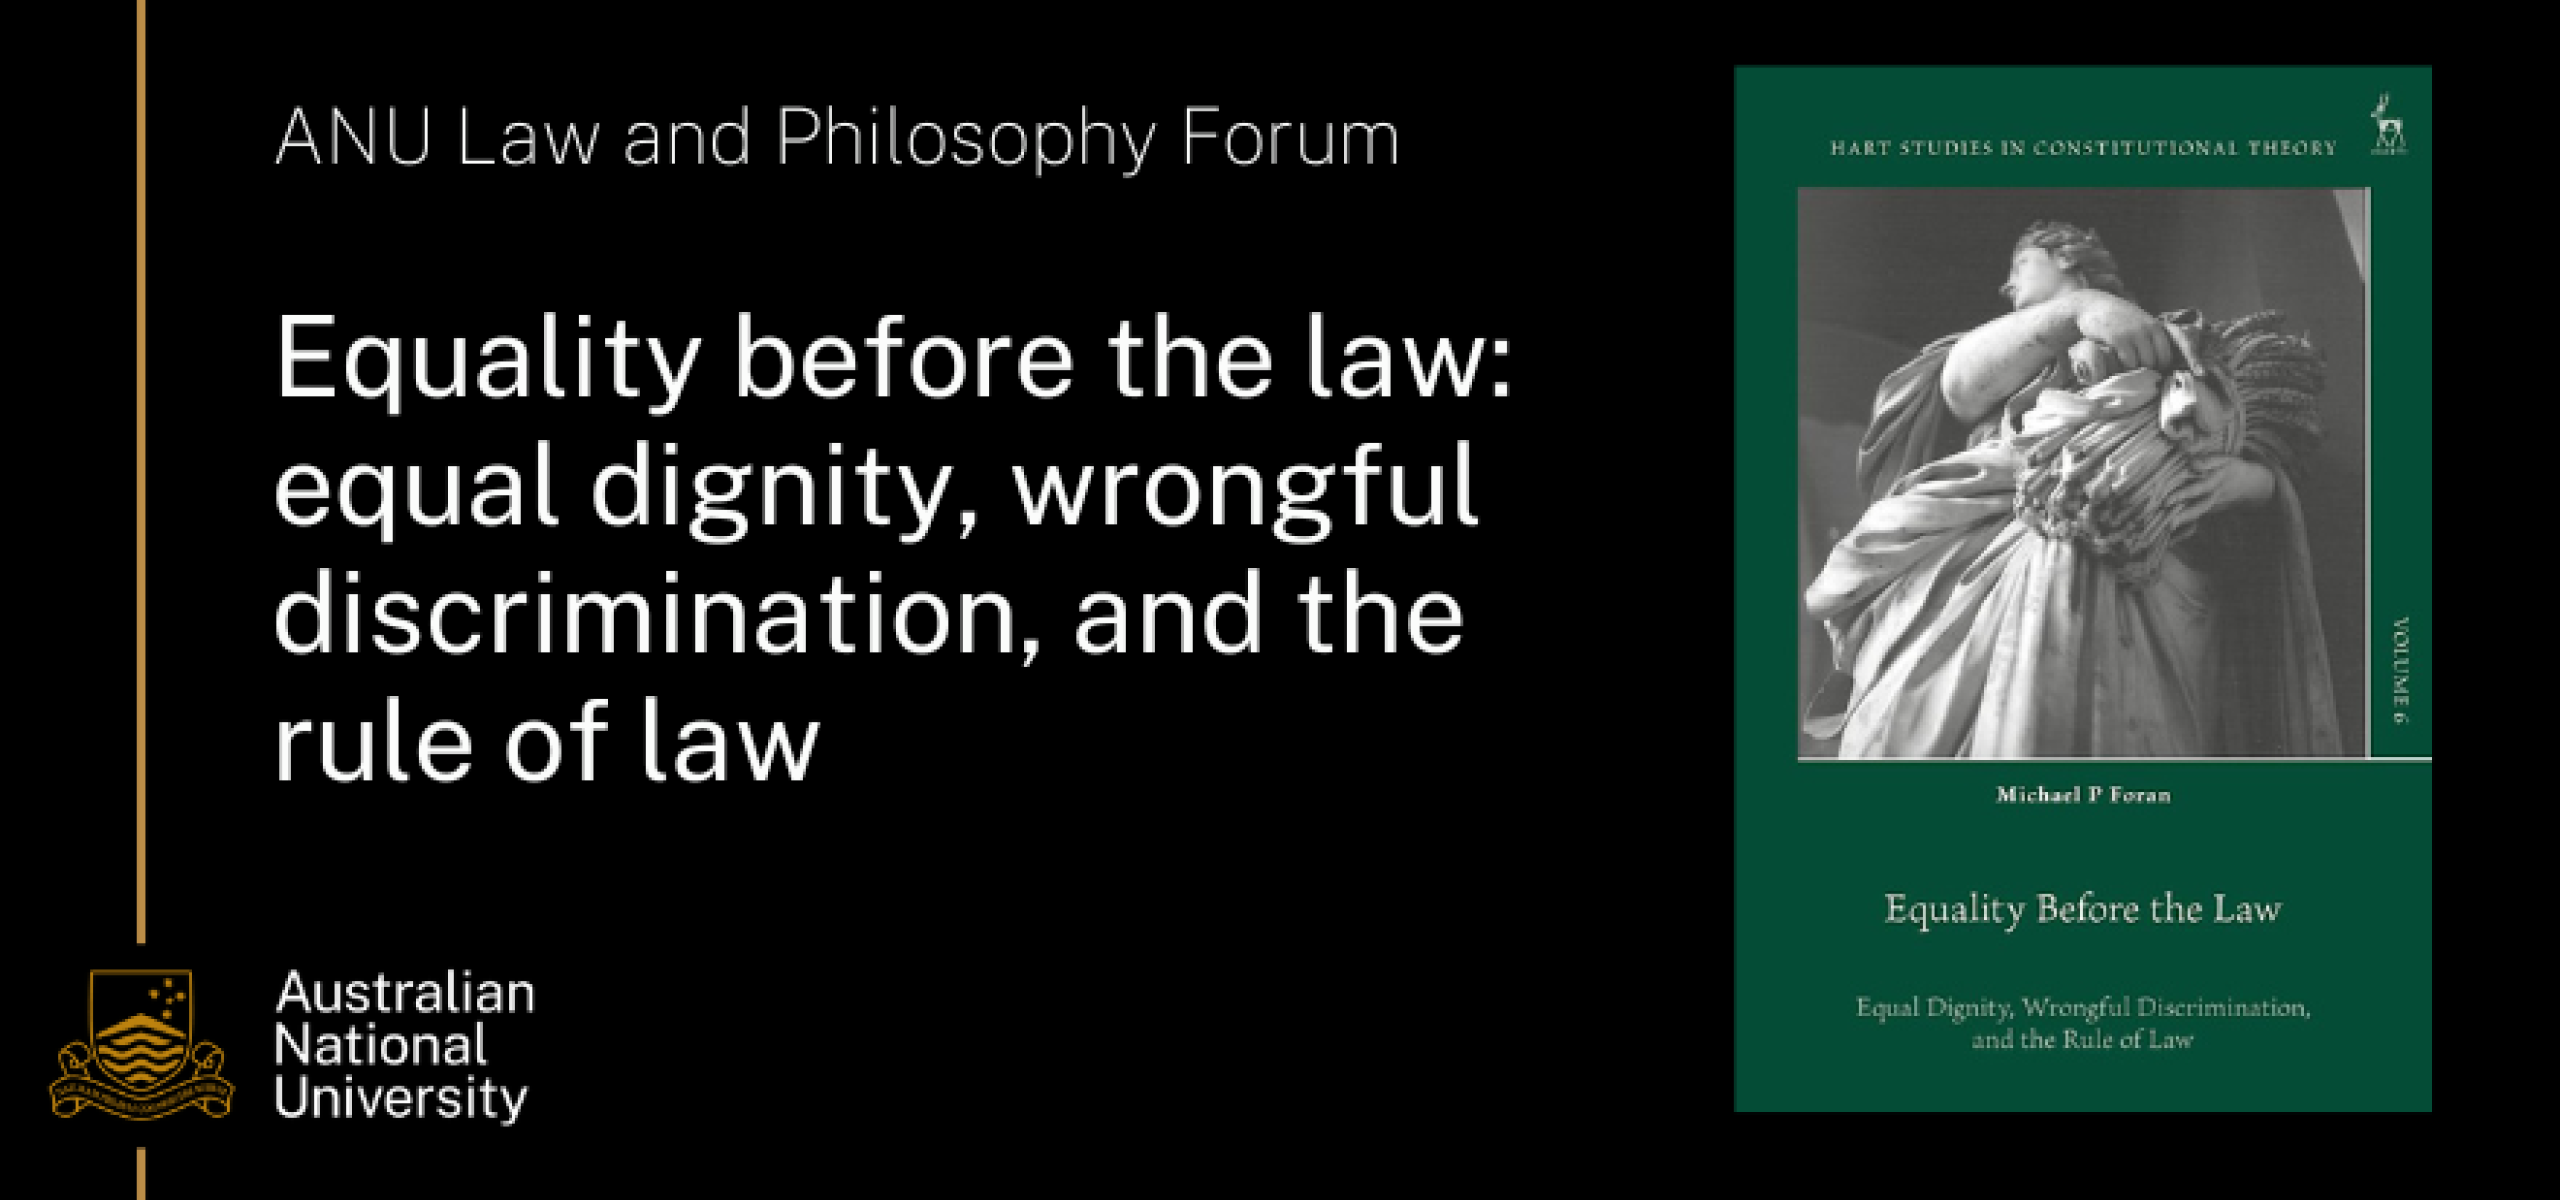 Equality before the law: equal dignity, wrongful discrimination, and the rule of law